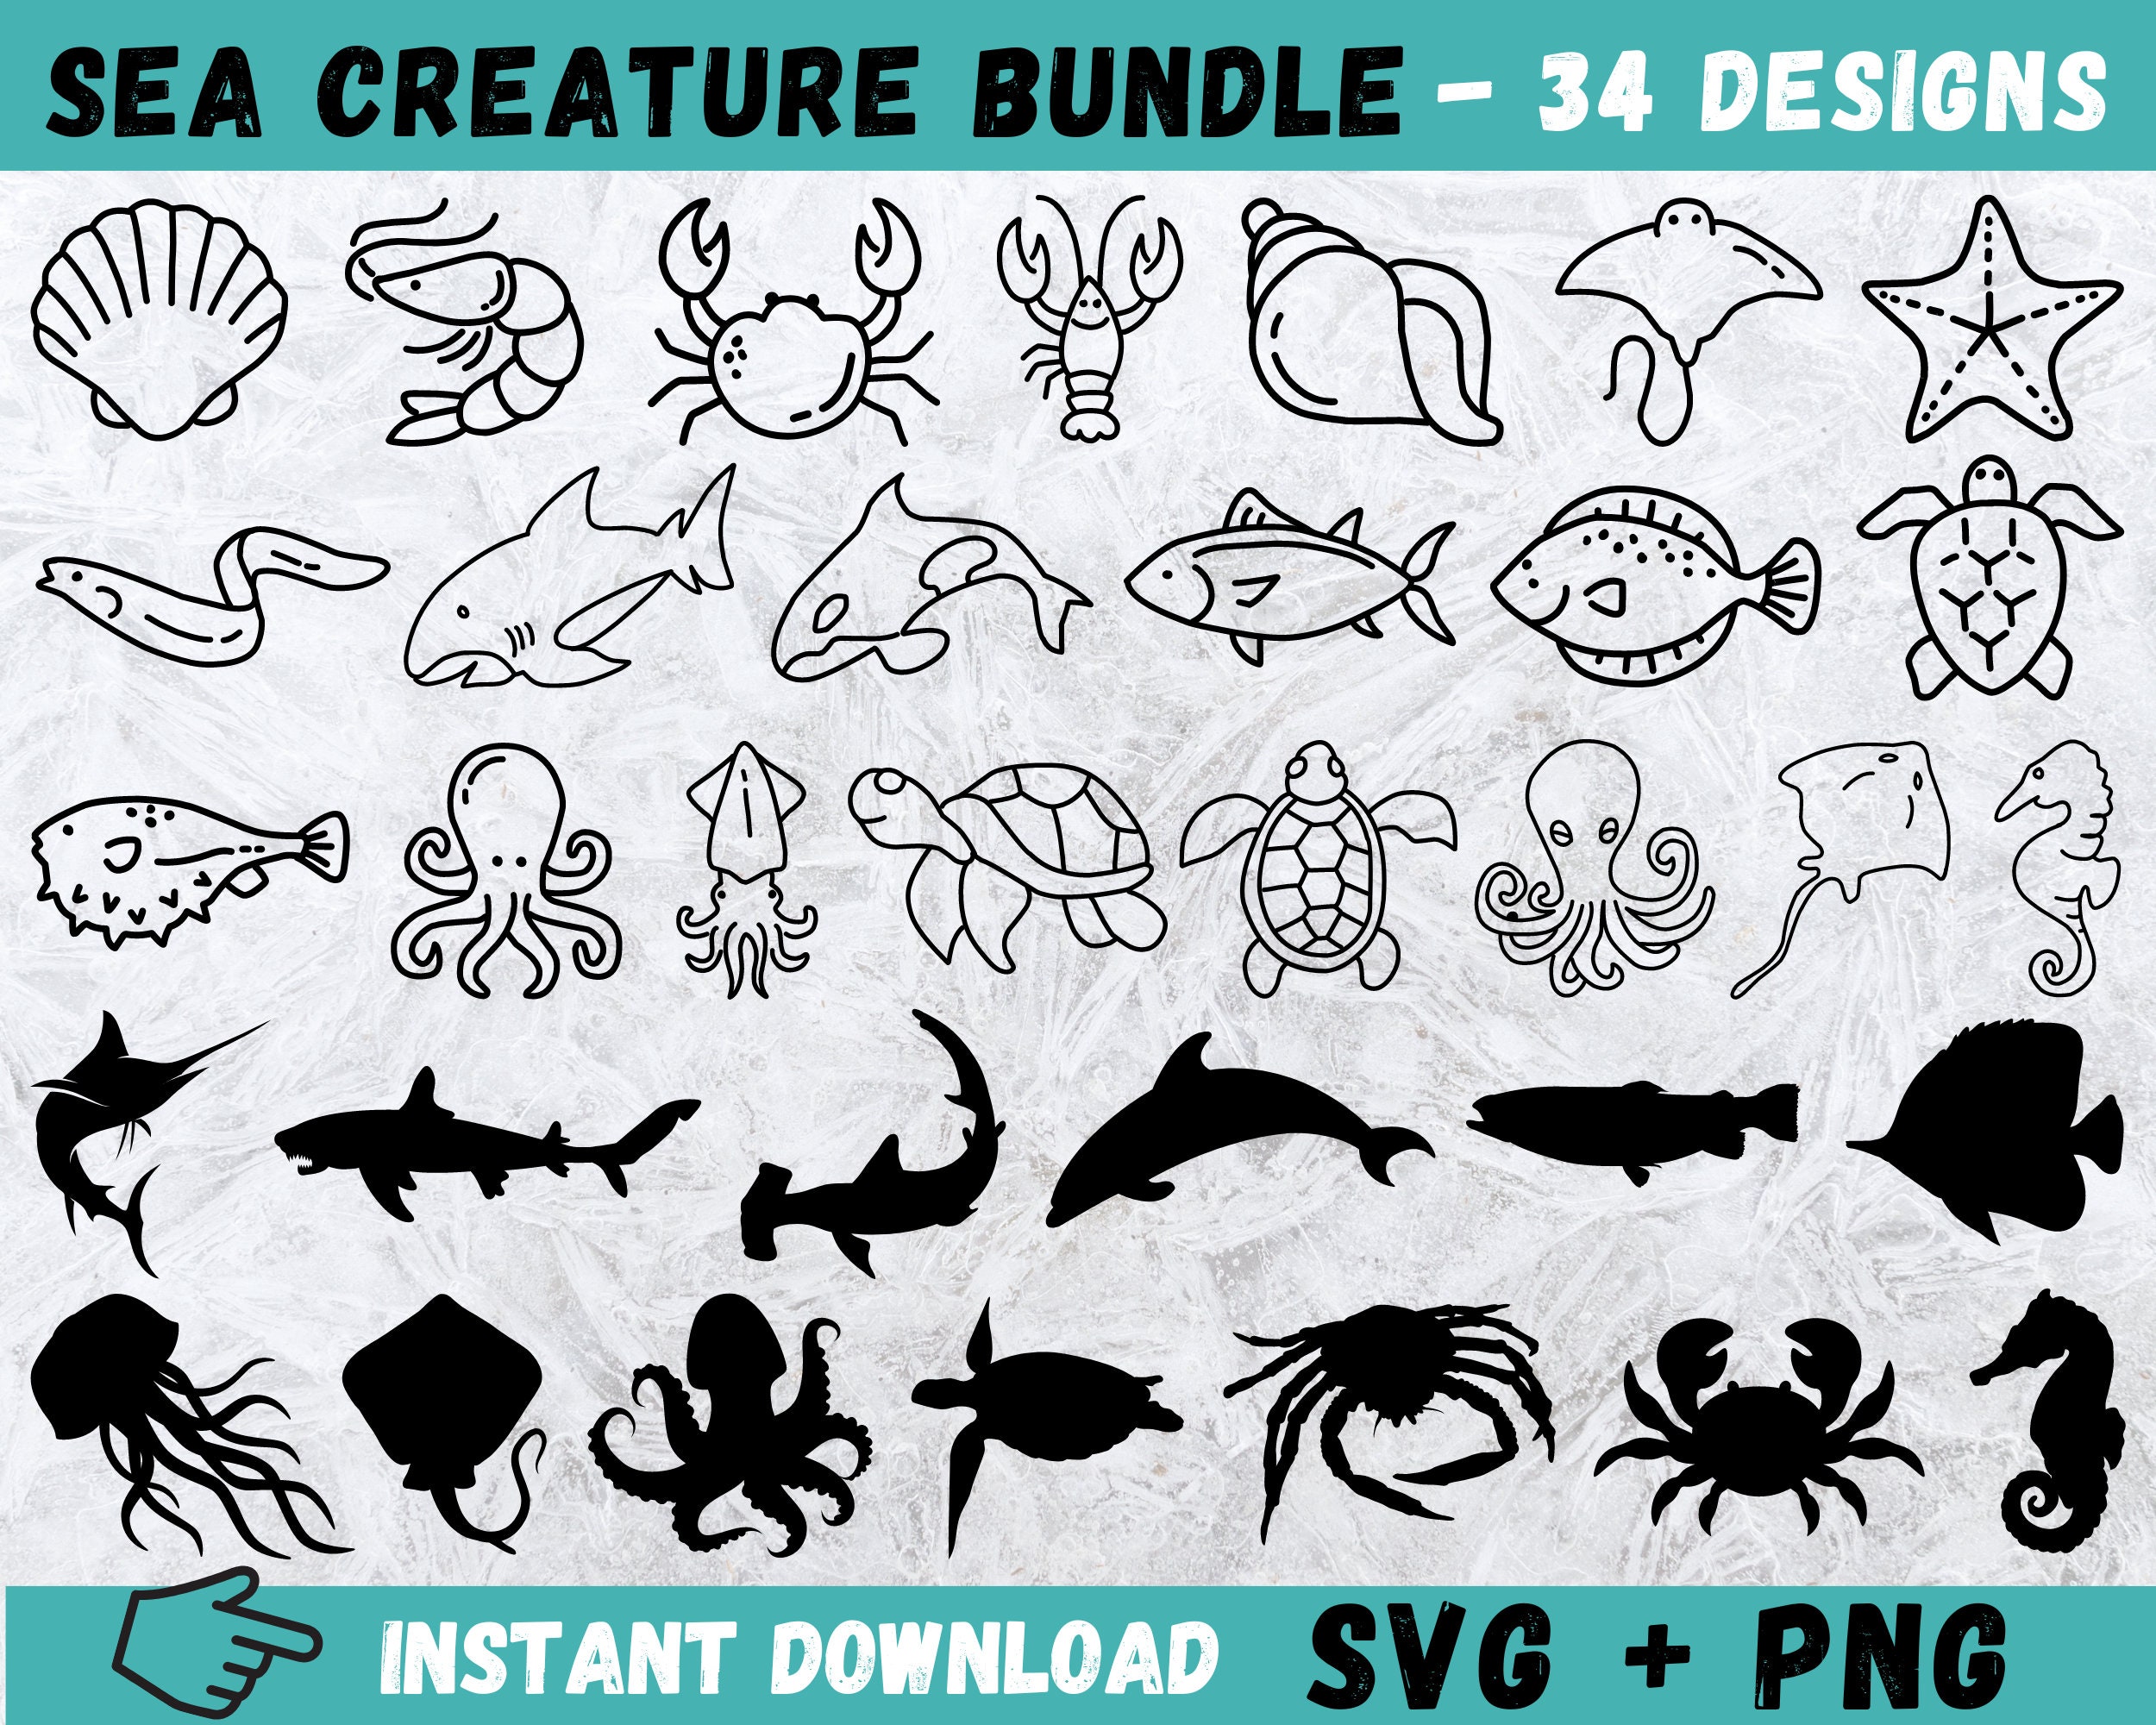 TBH Creature Meme Svg, Eps, Png, Dxf, Digital Download - Inspire